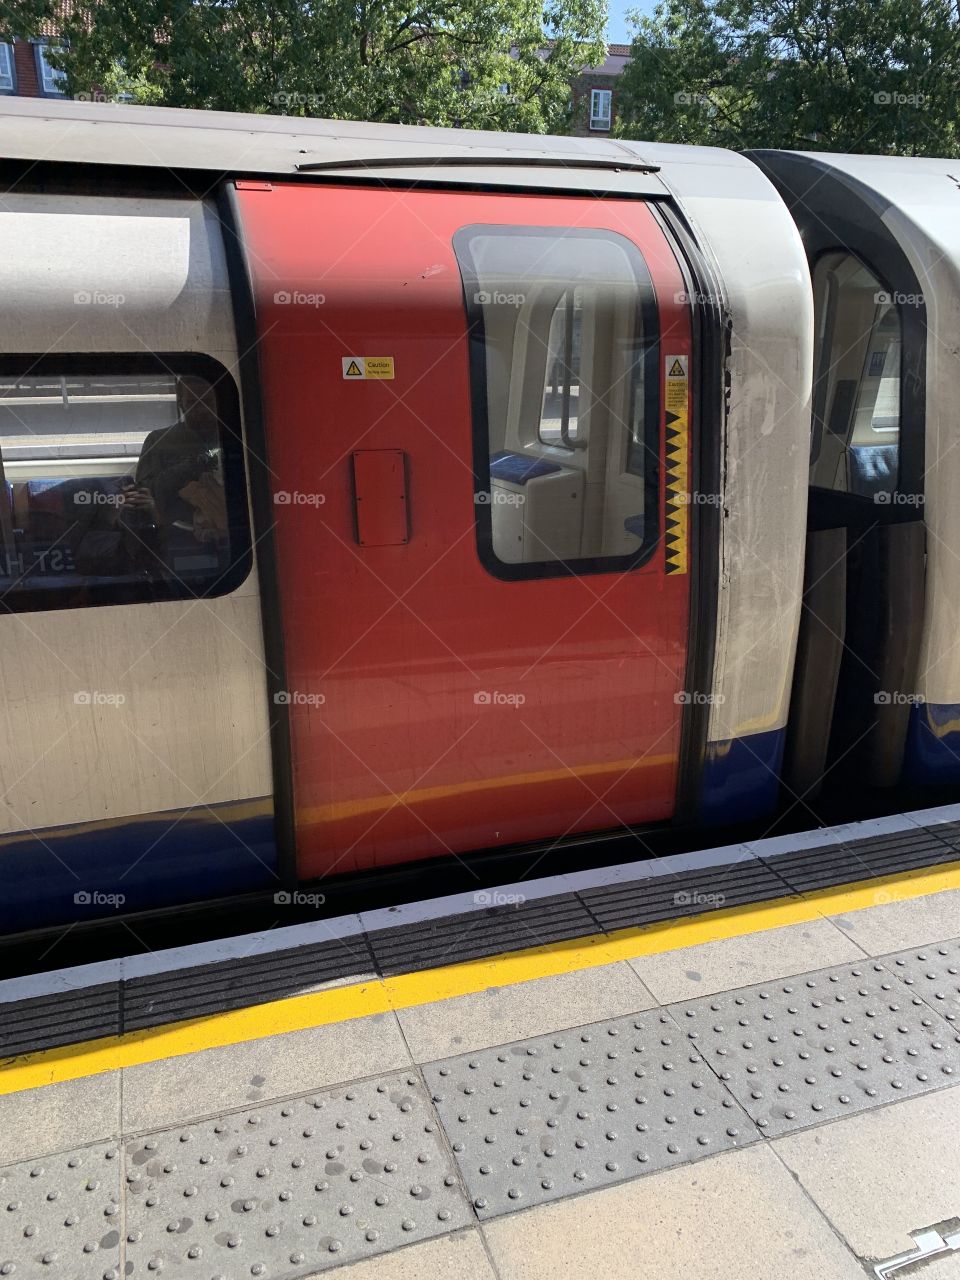 The good old jubilee line train